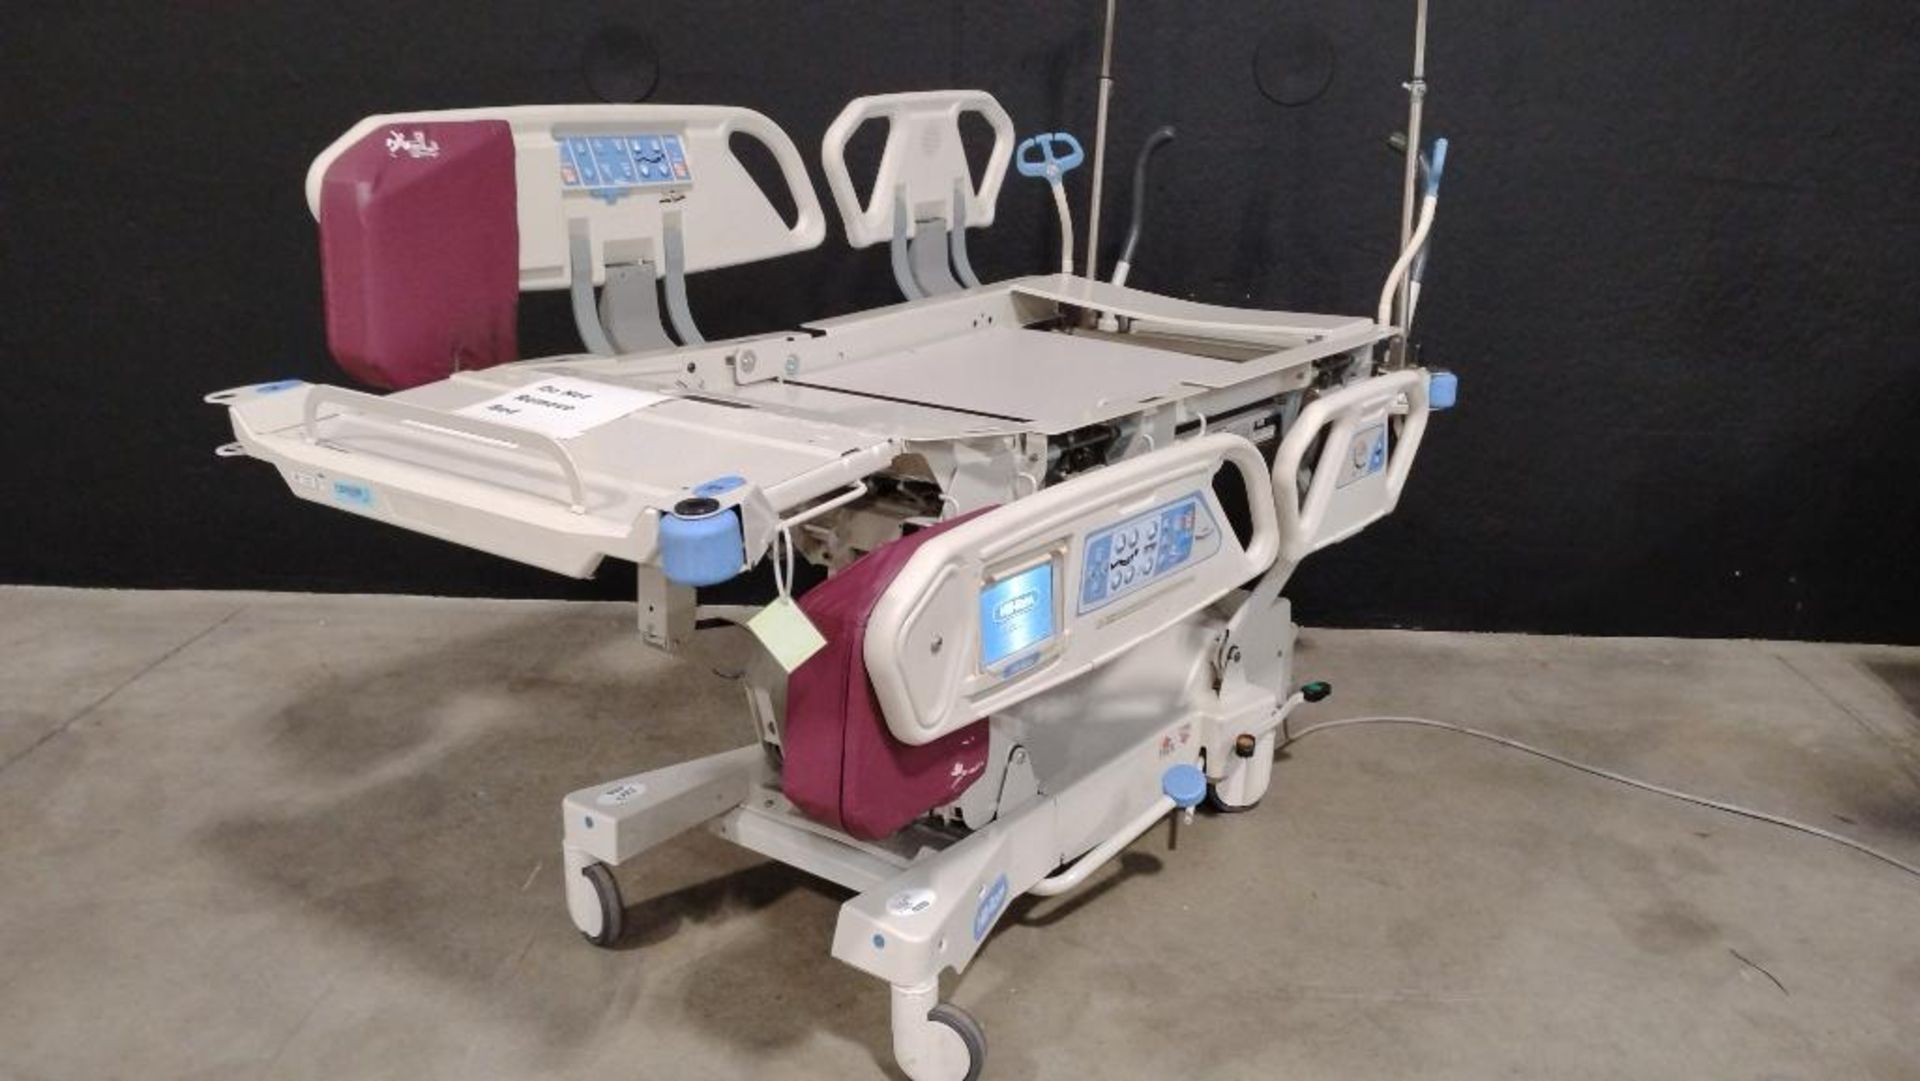 HILL-ROM TOTAL CARE SPORT 2 P1900 HOSPITAL BED